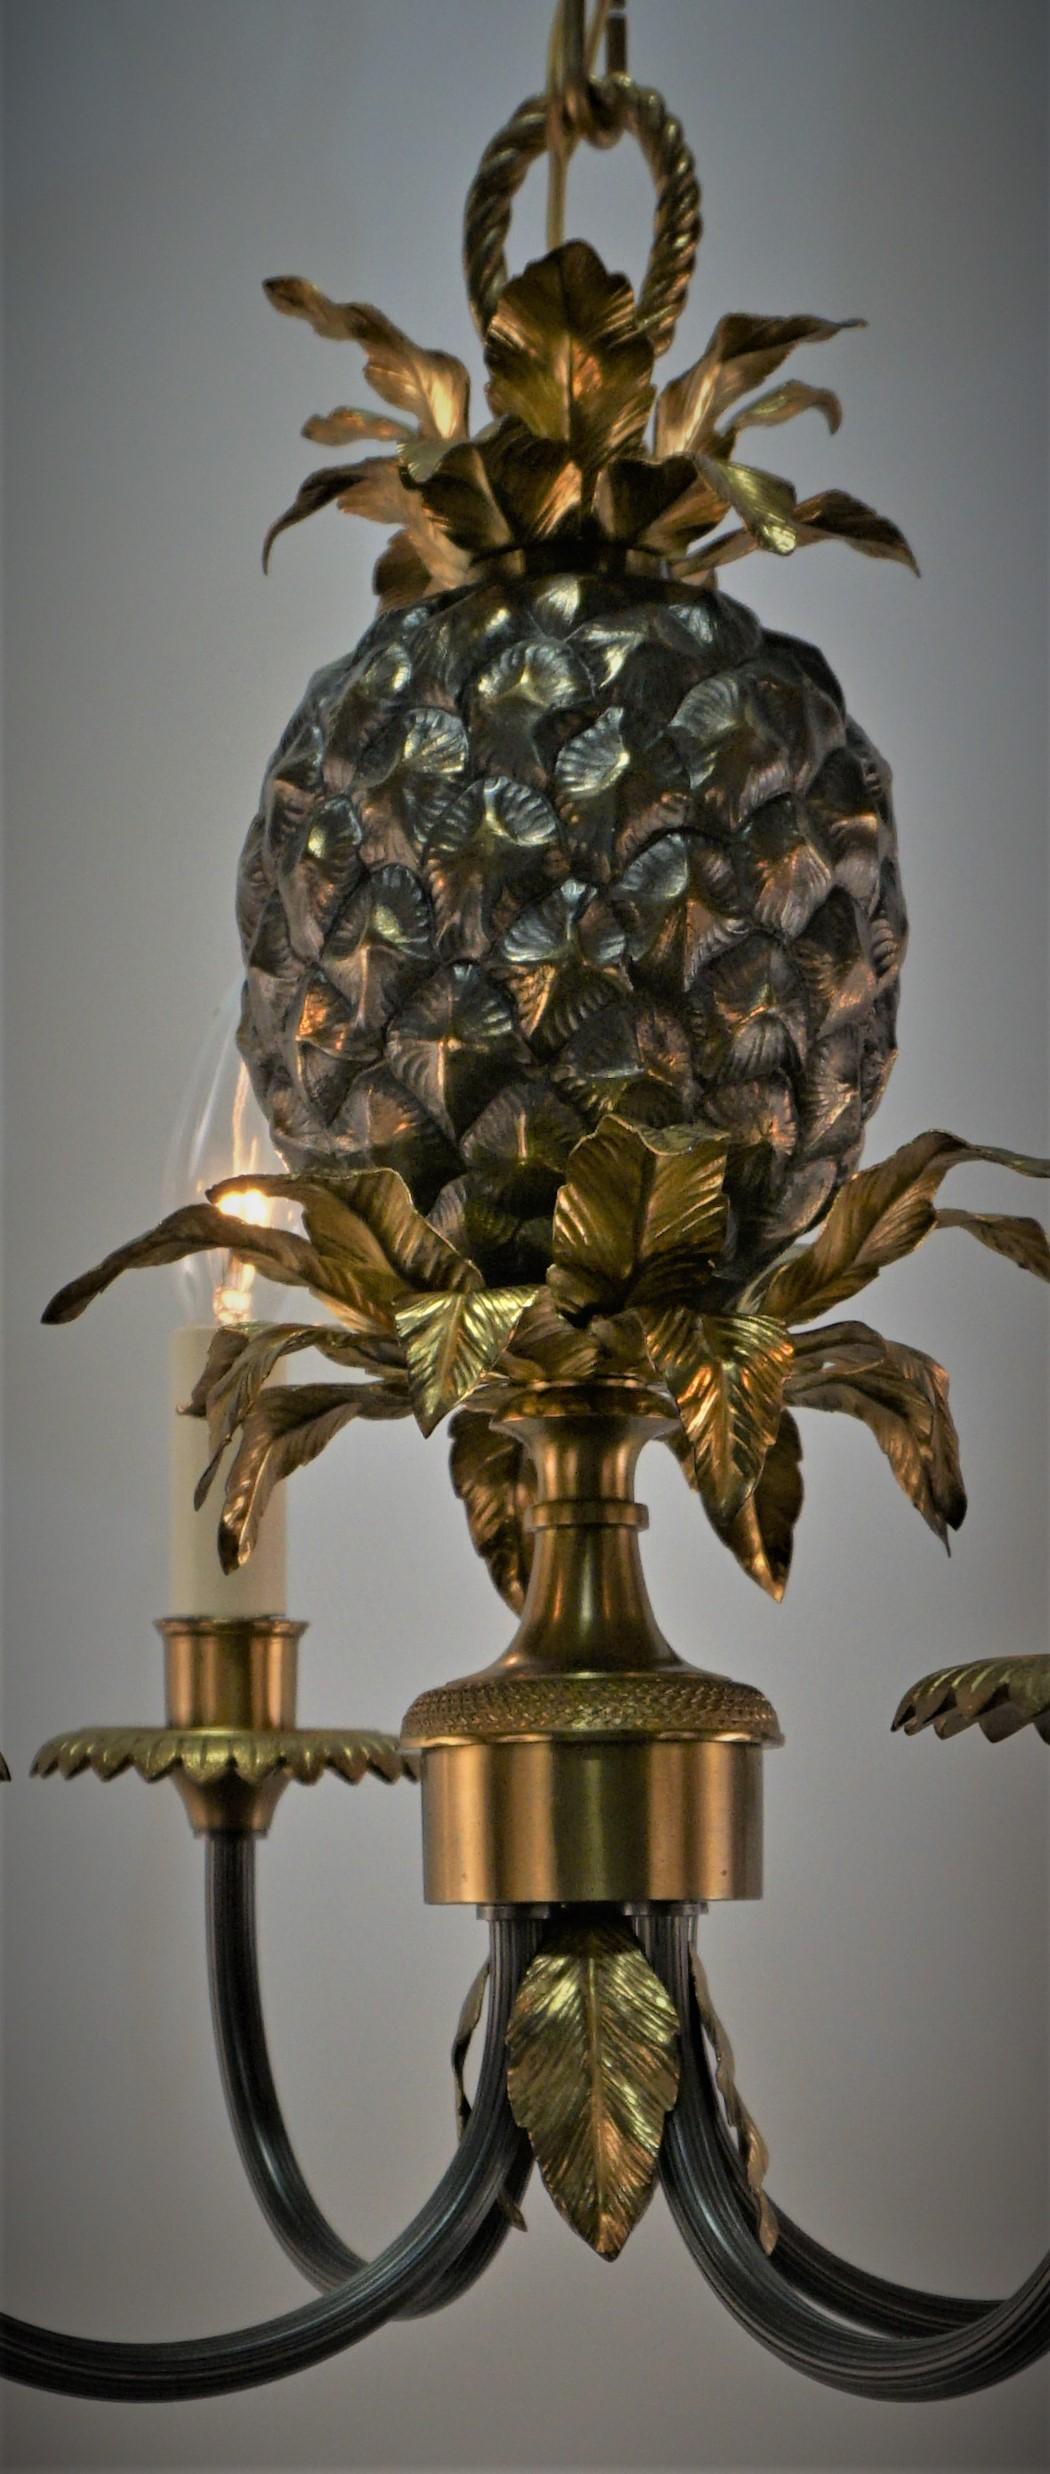 Maison Charles four light pineapple two-tone bronze chandelier.
Total height including all the chain is 28